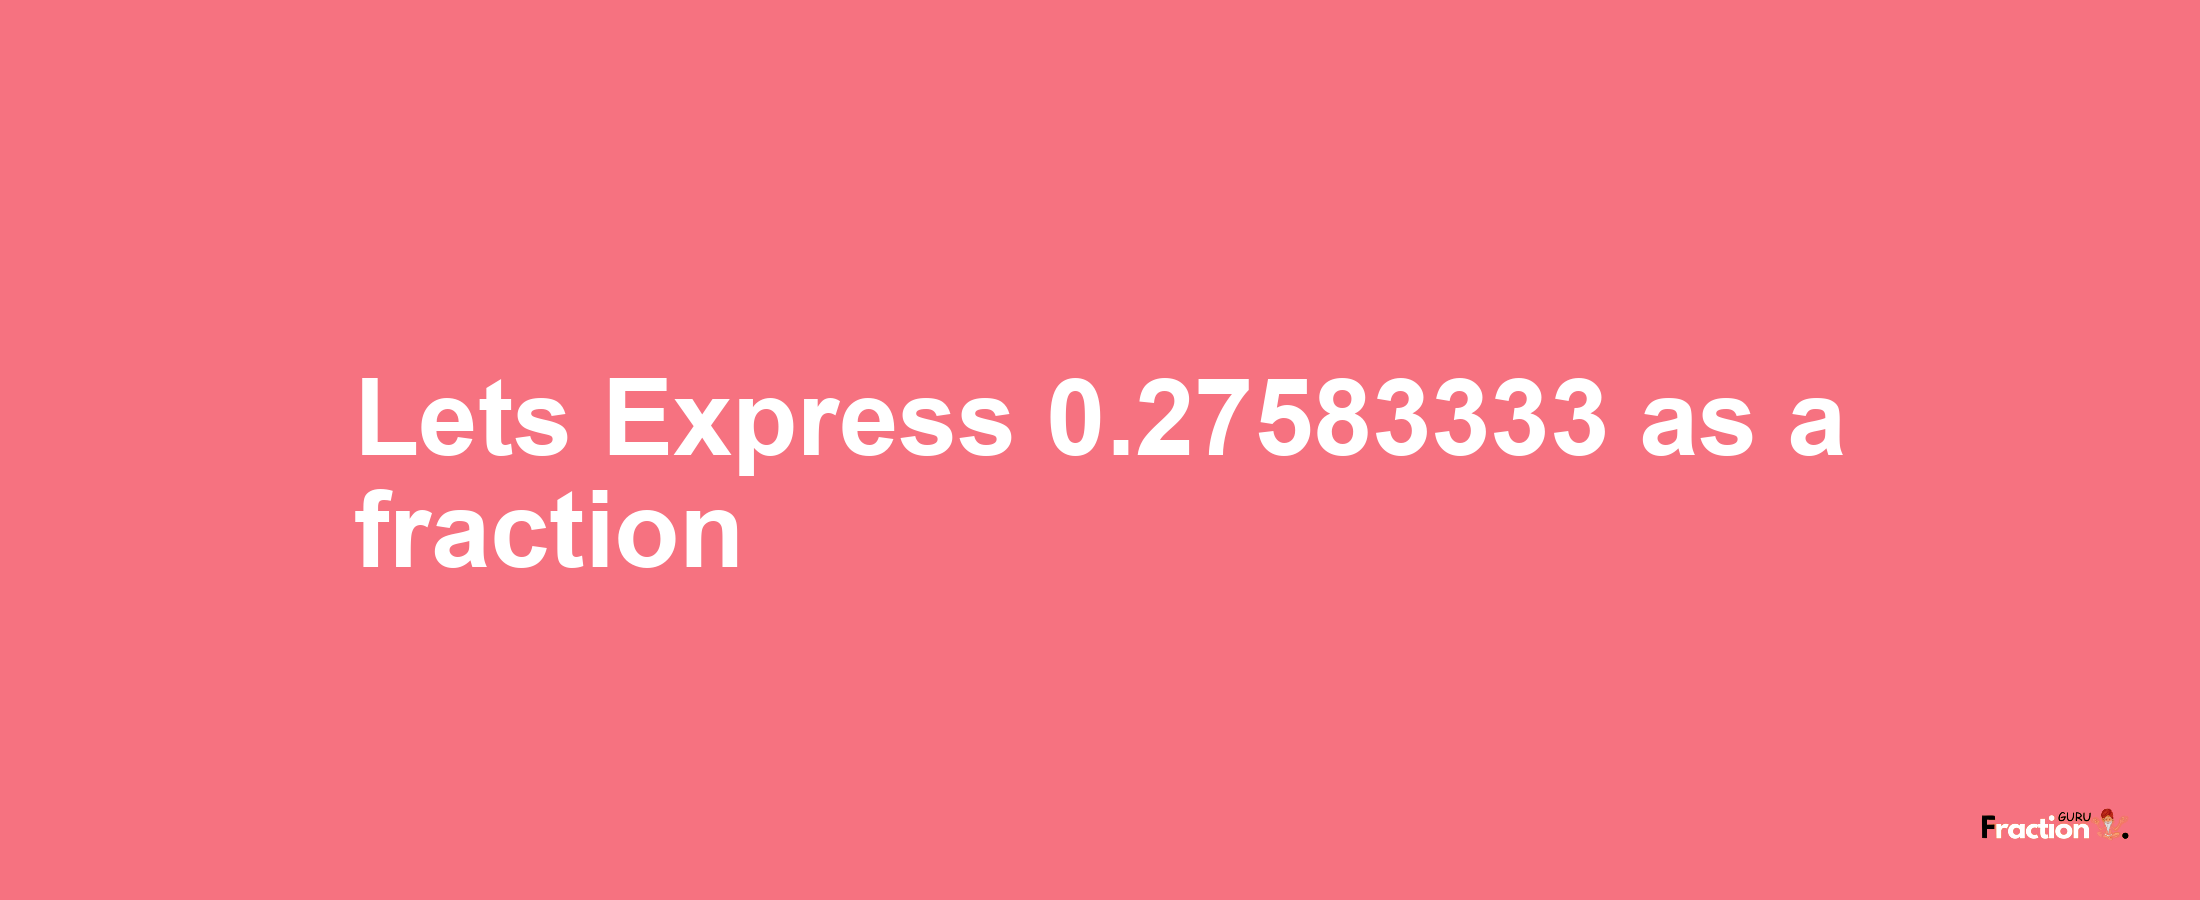 Lets Express 0.27583333 as afraction